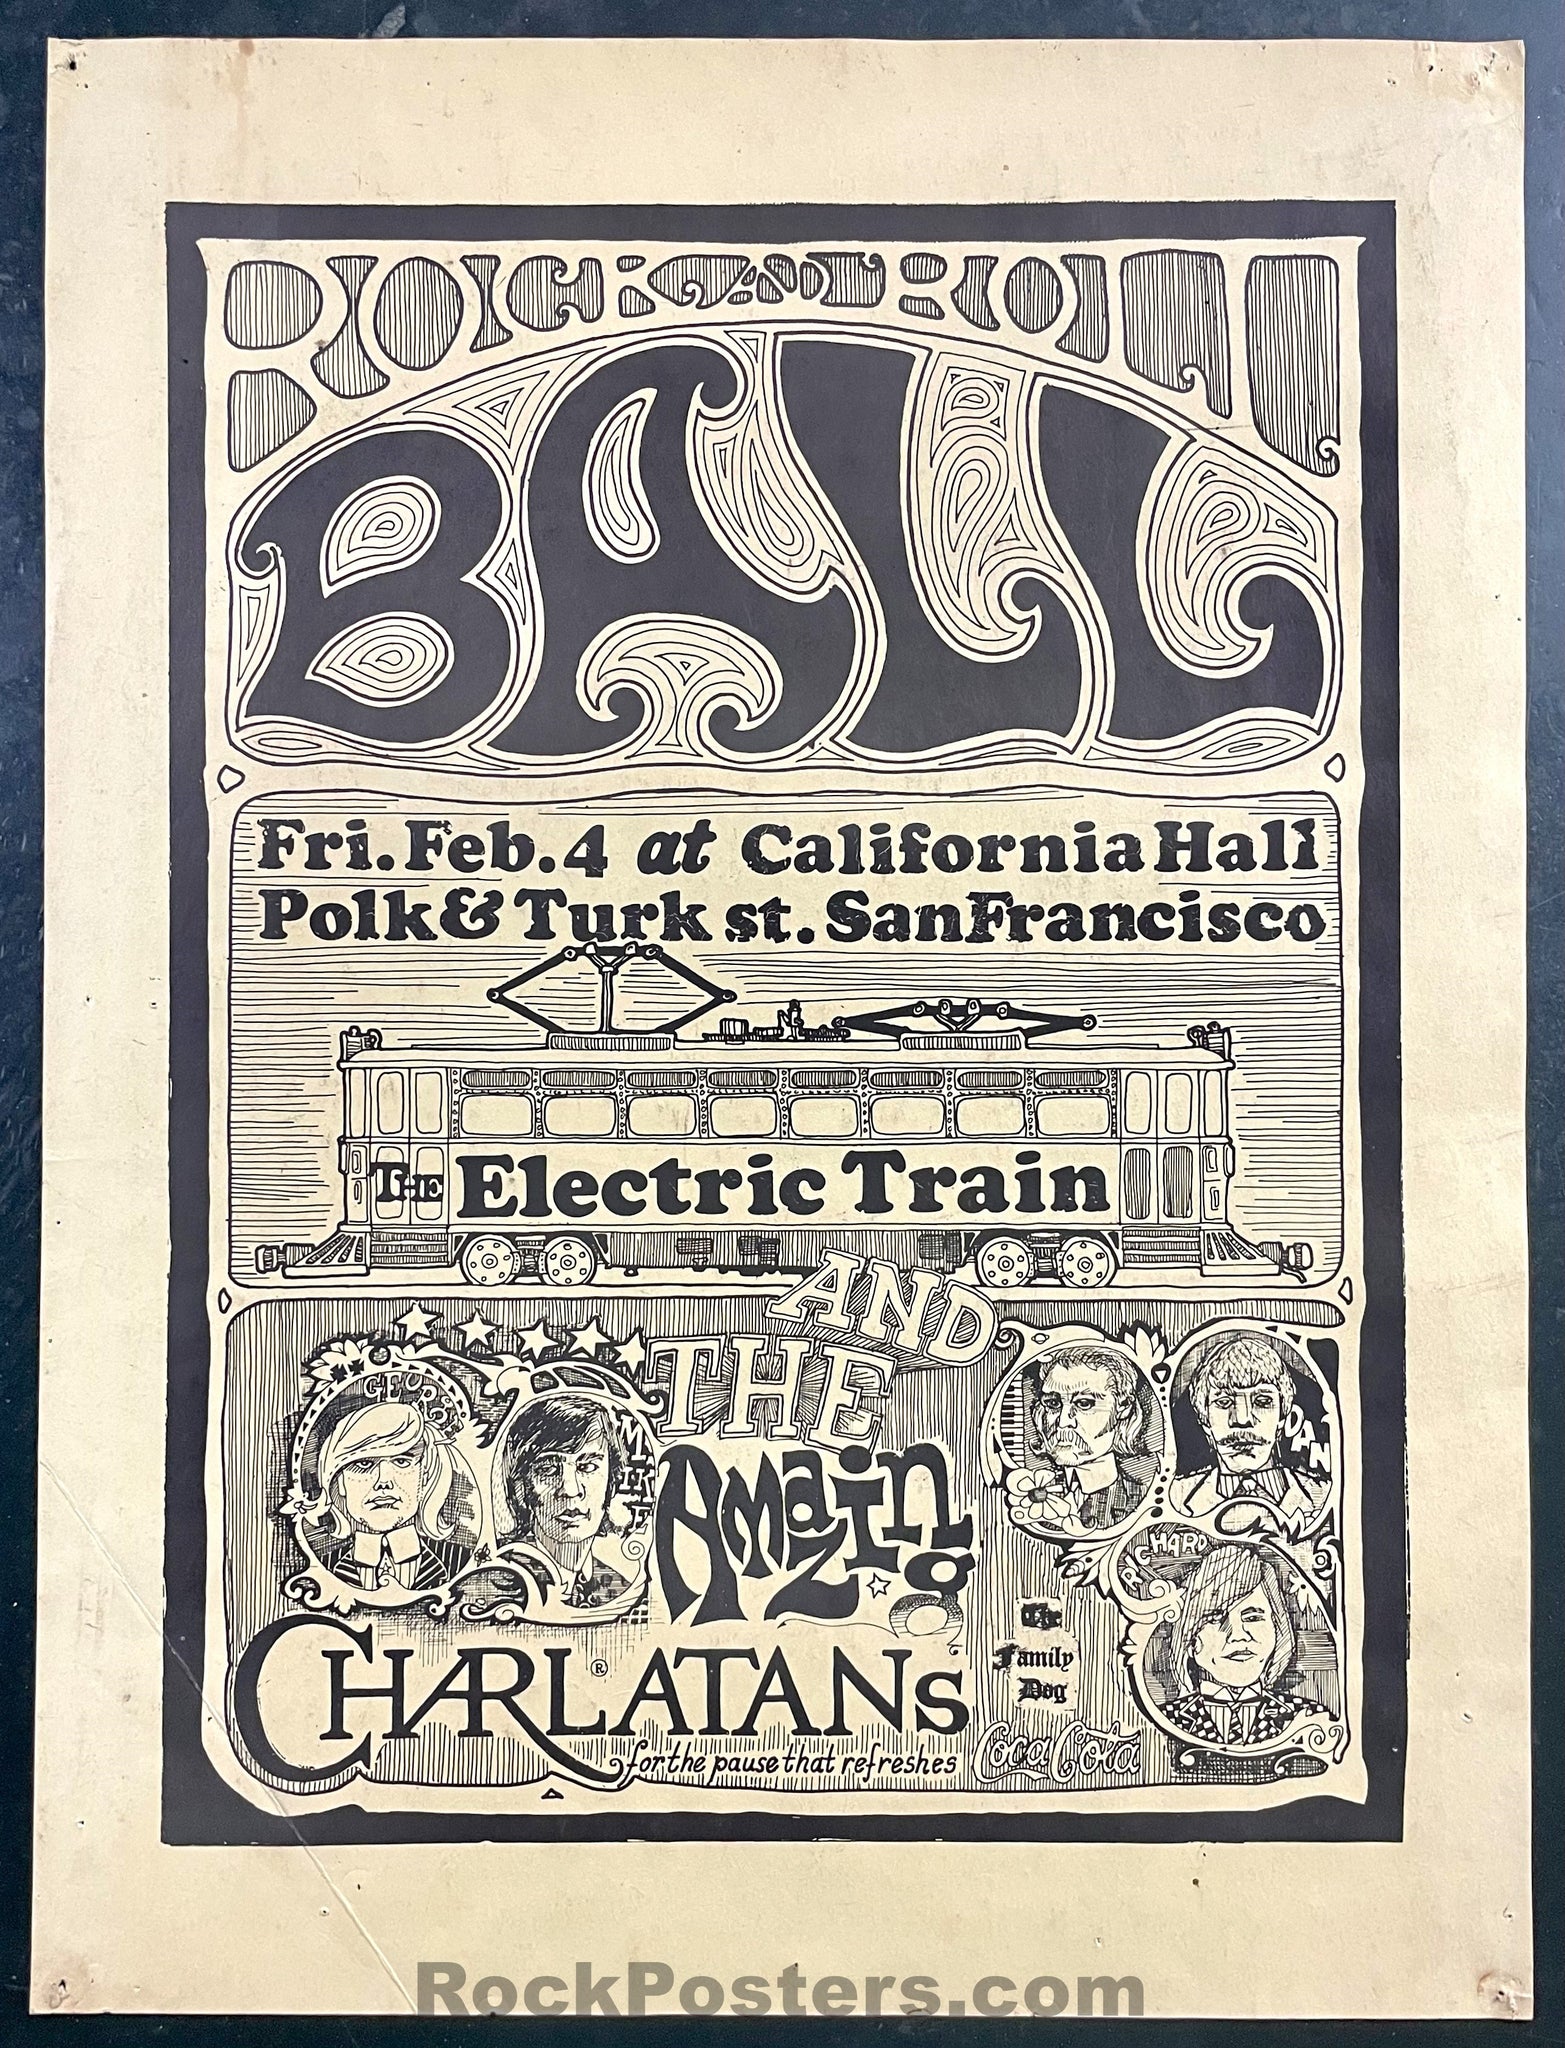 AUCTION - The Charlatans - Rock n' Roll Ball - 1966 Poster - California Hall - Very Good